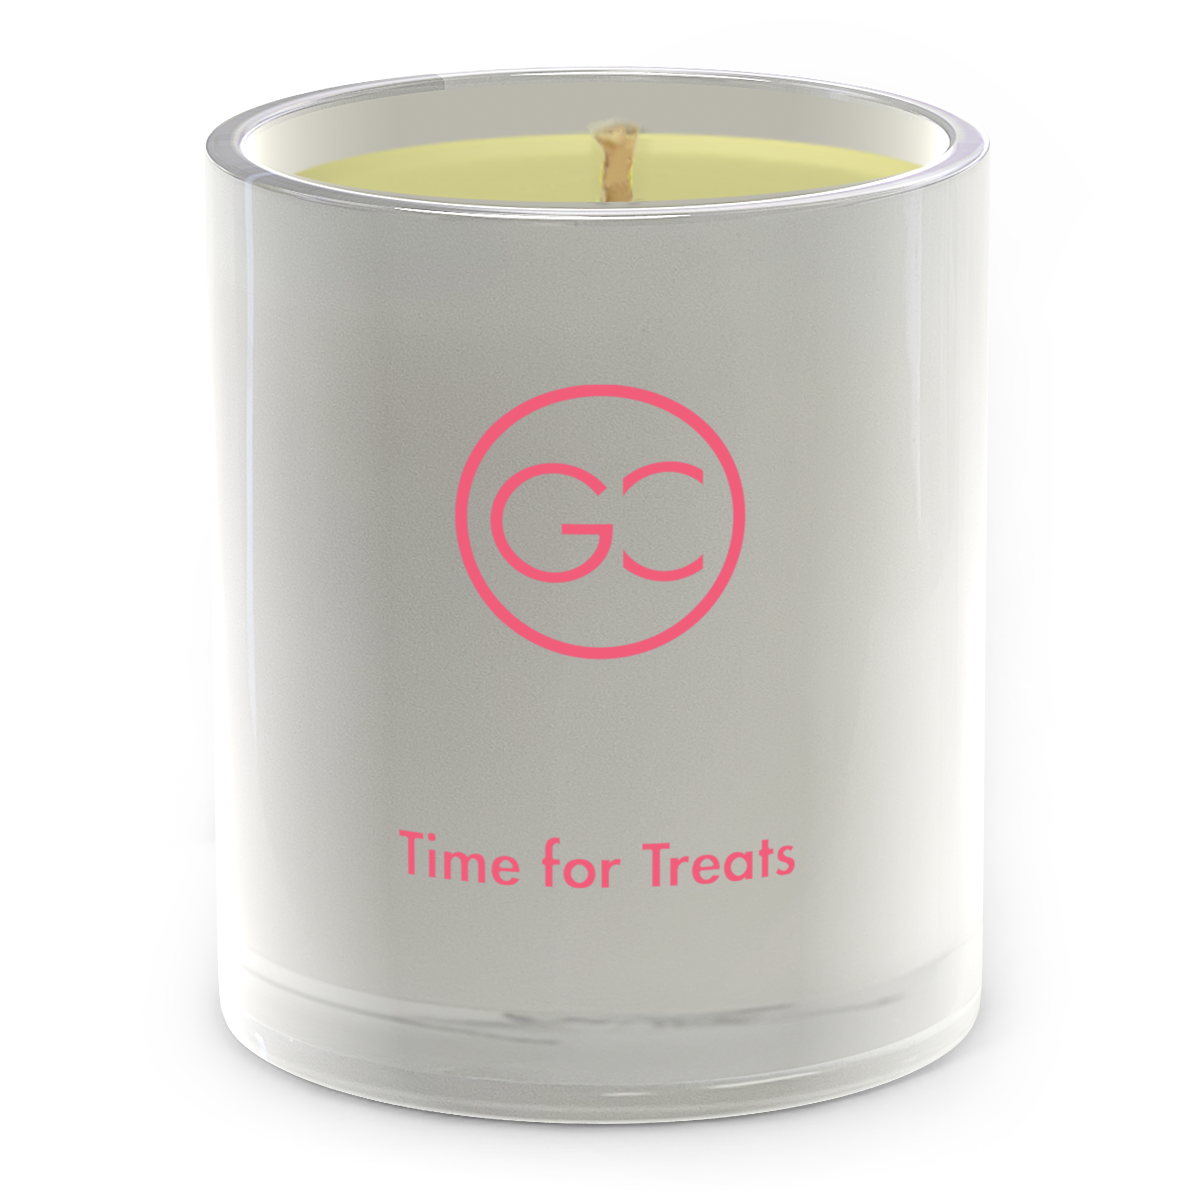 Time for Treats - Coconut &amp; Caramel Scented Soy Candle 55hr Burn